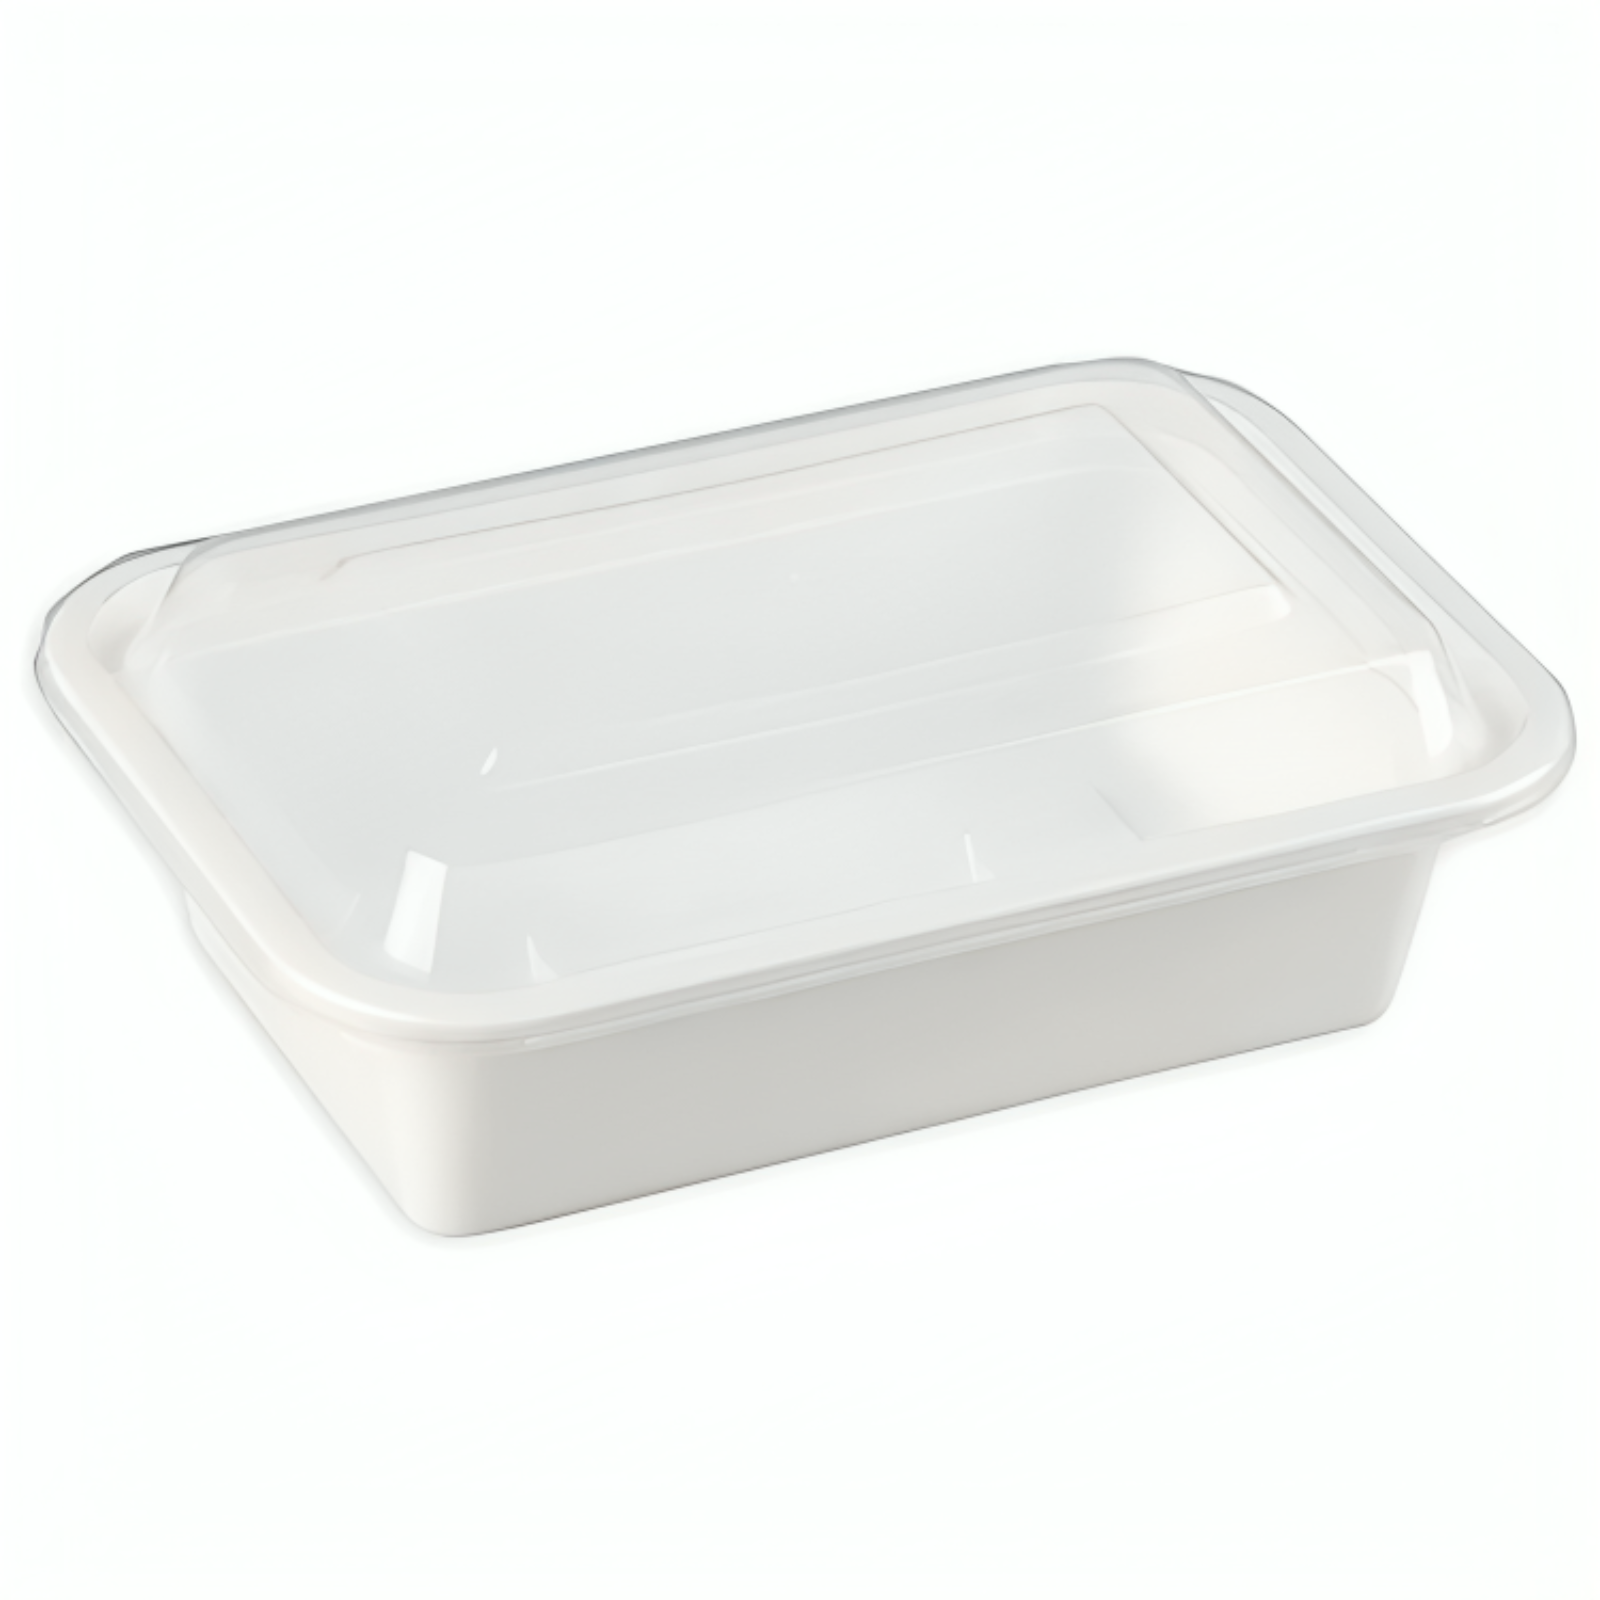 38oz Extra Strong Quality White Rectangular Meal Prep/ Bento Box Container Food Storage & Serving VeZee   